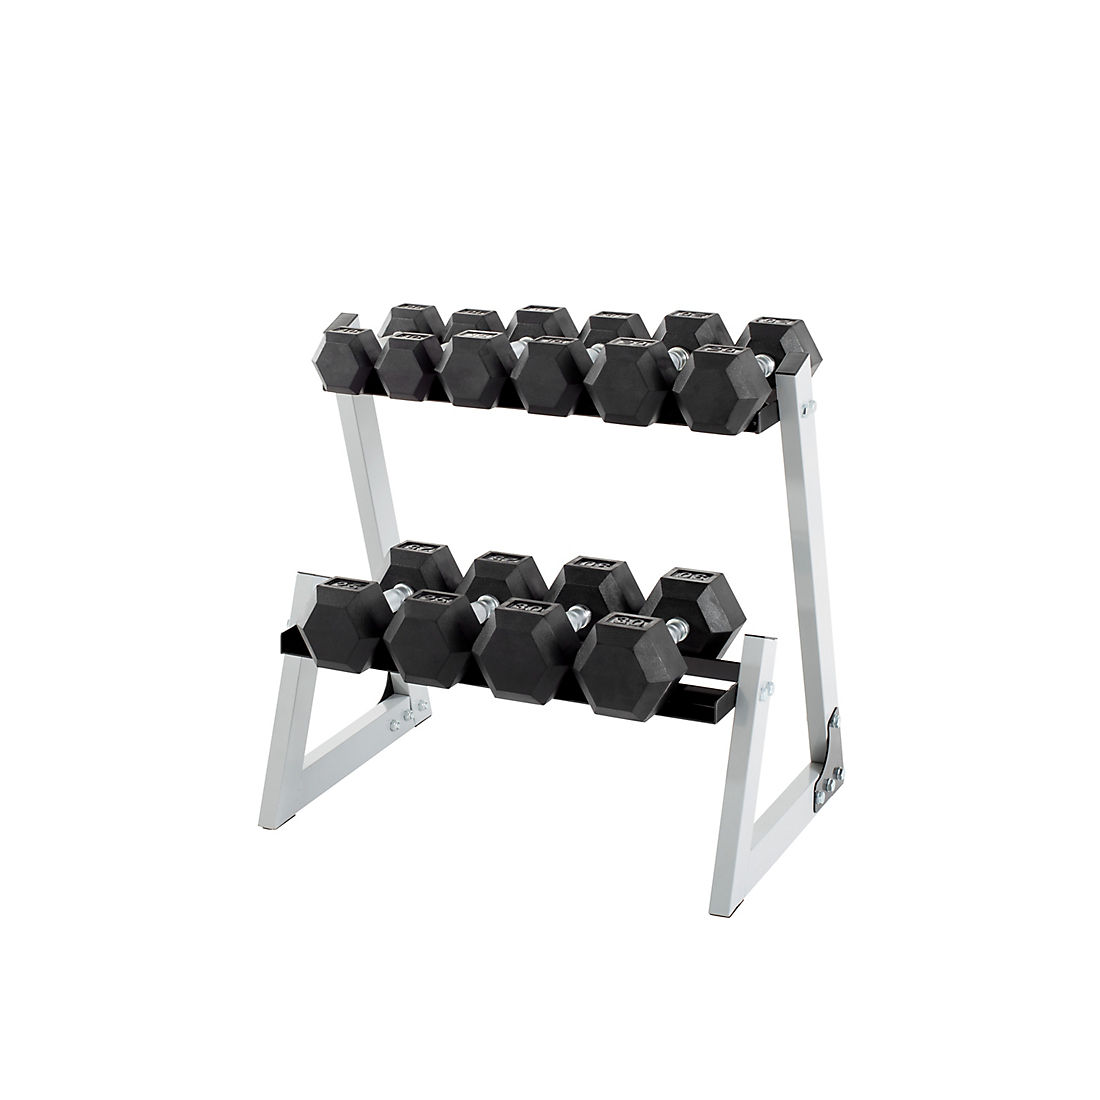 BRAND NEW Weider 10lbs Rubber Hex Dumbbell Set FAST SHIPPING! 20lbs TOTAL 